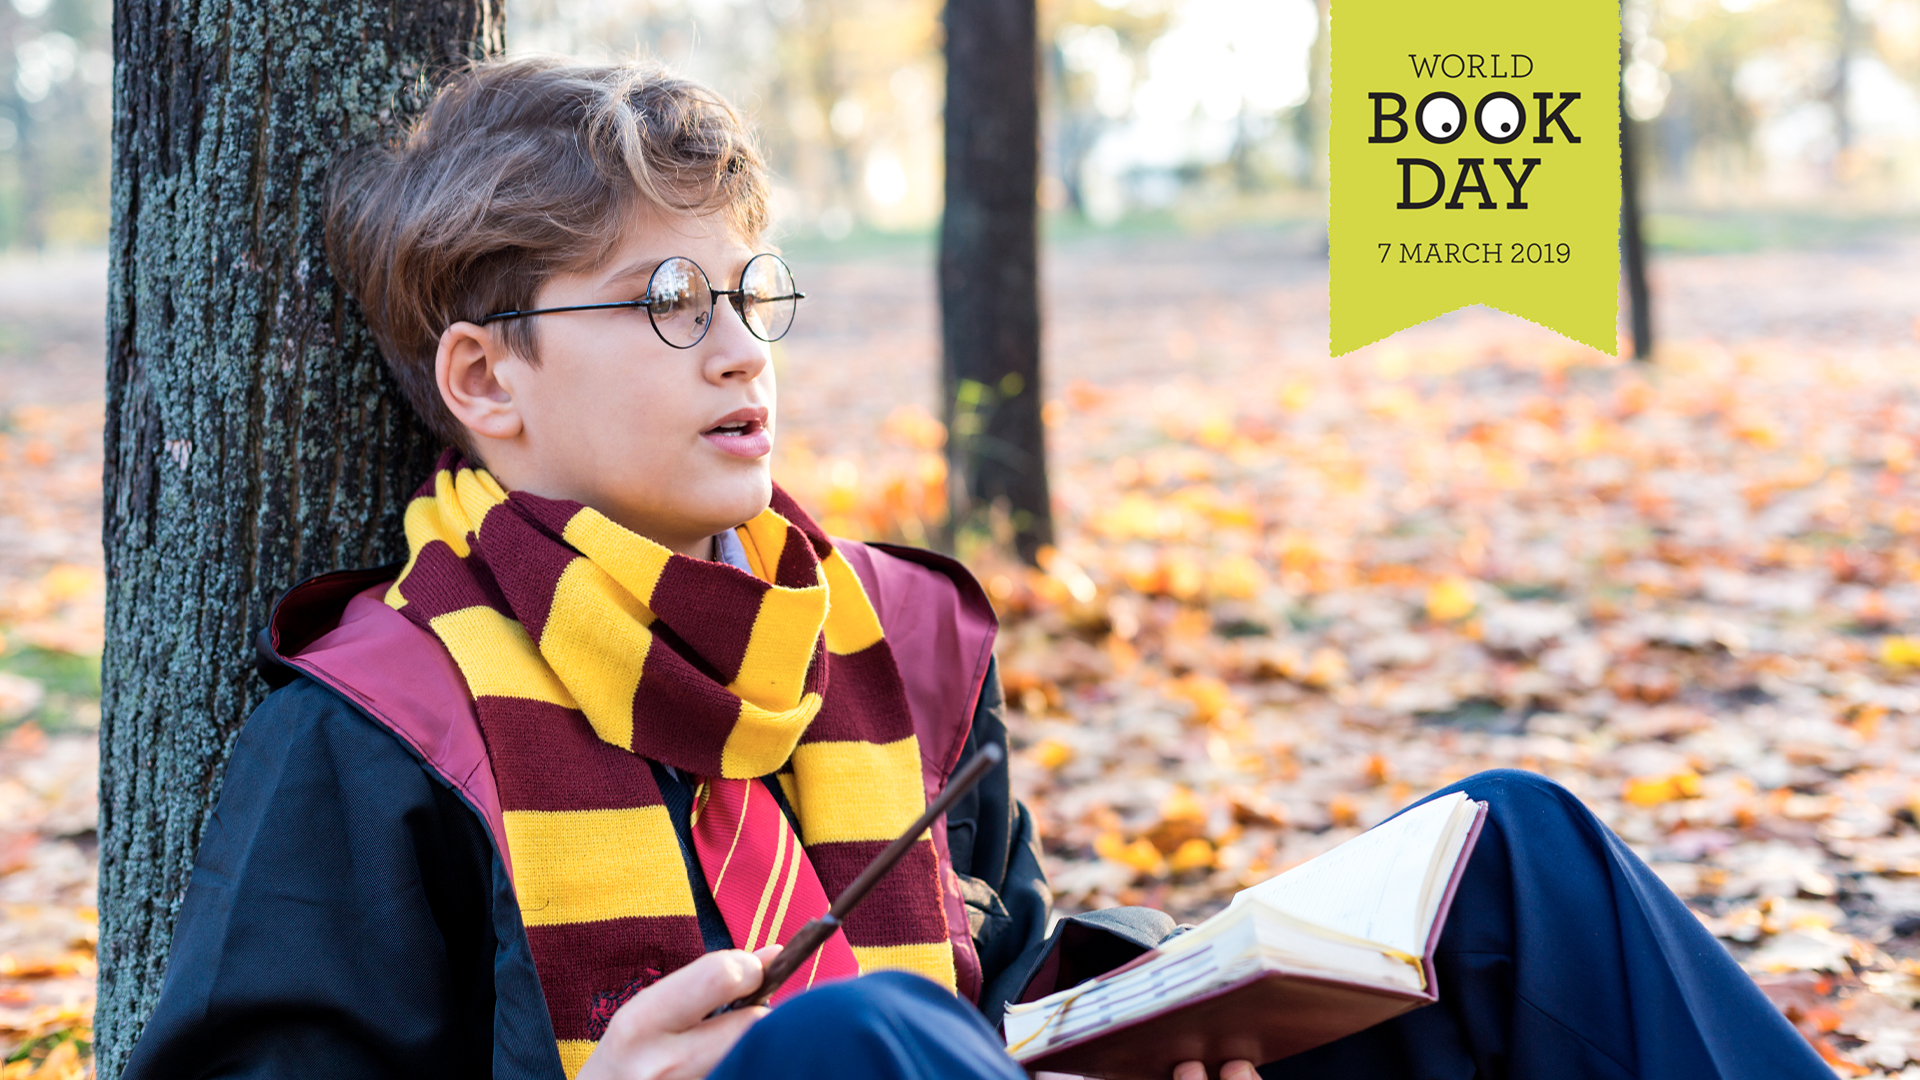 5 easy costume ideas for World Book Day